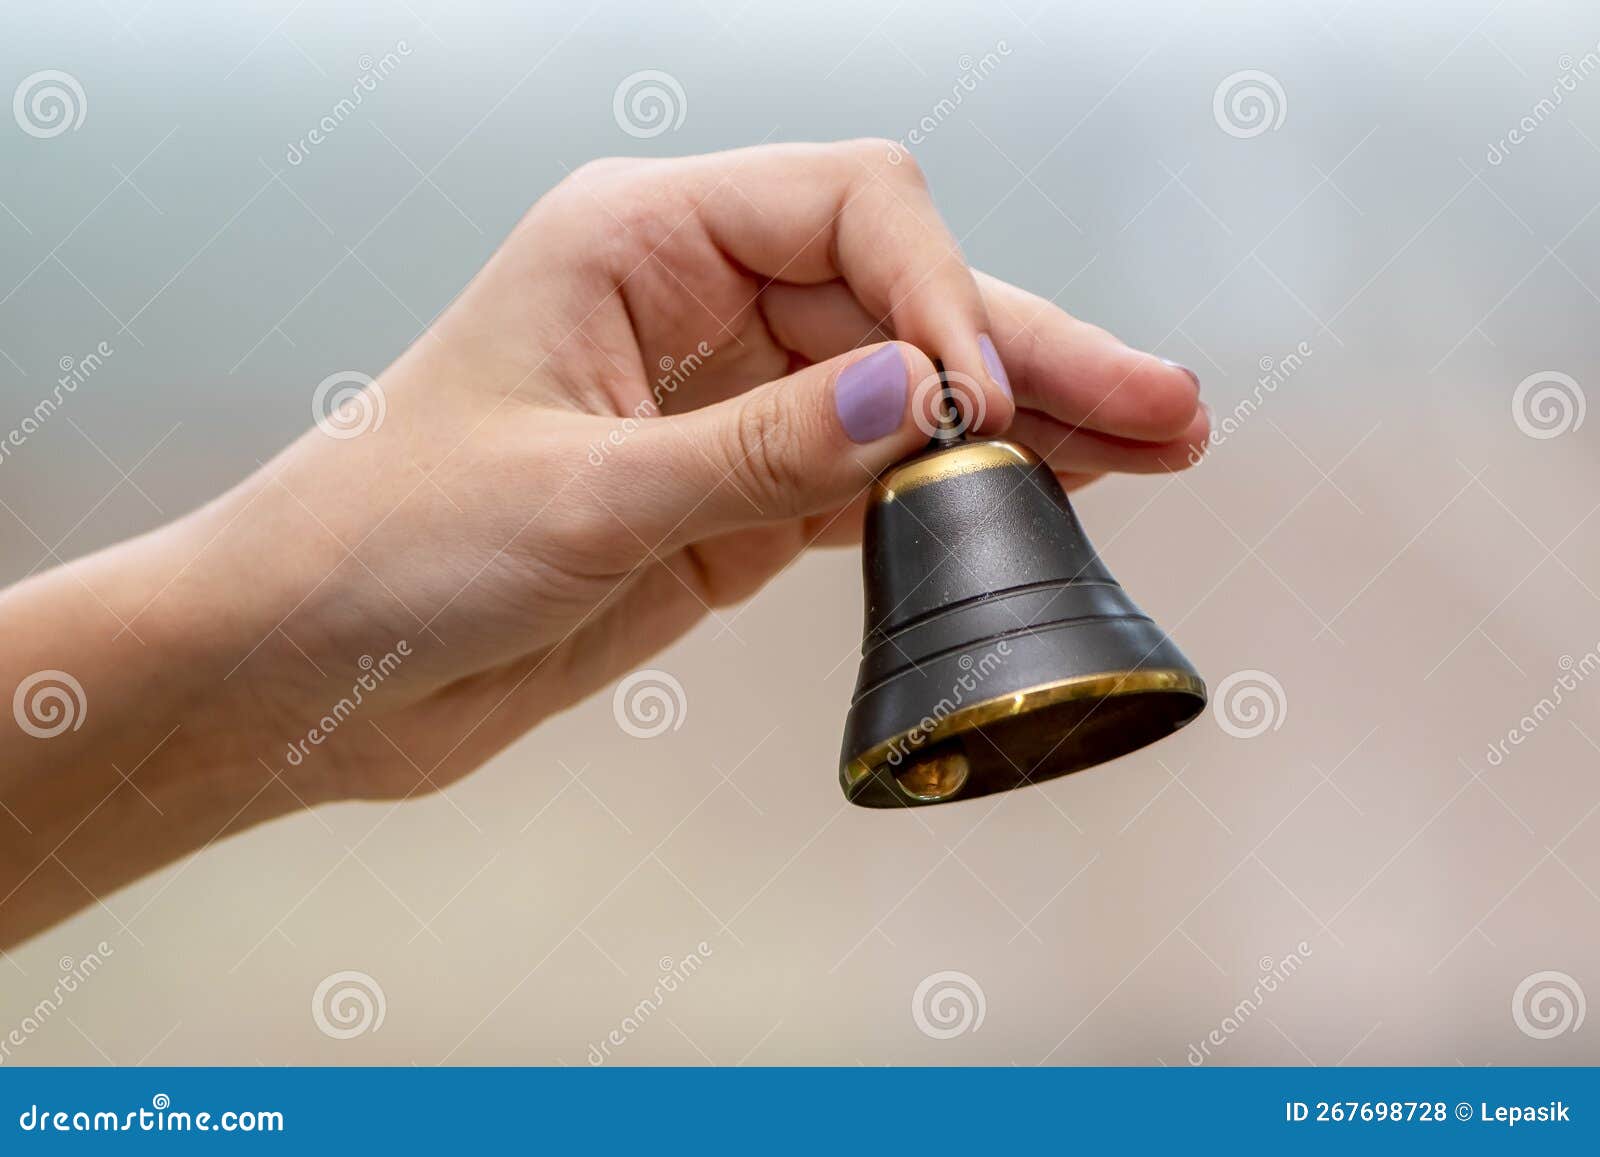 Why Are Bells Ringing Today? | National Bell Festival